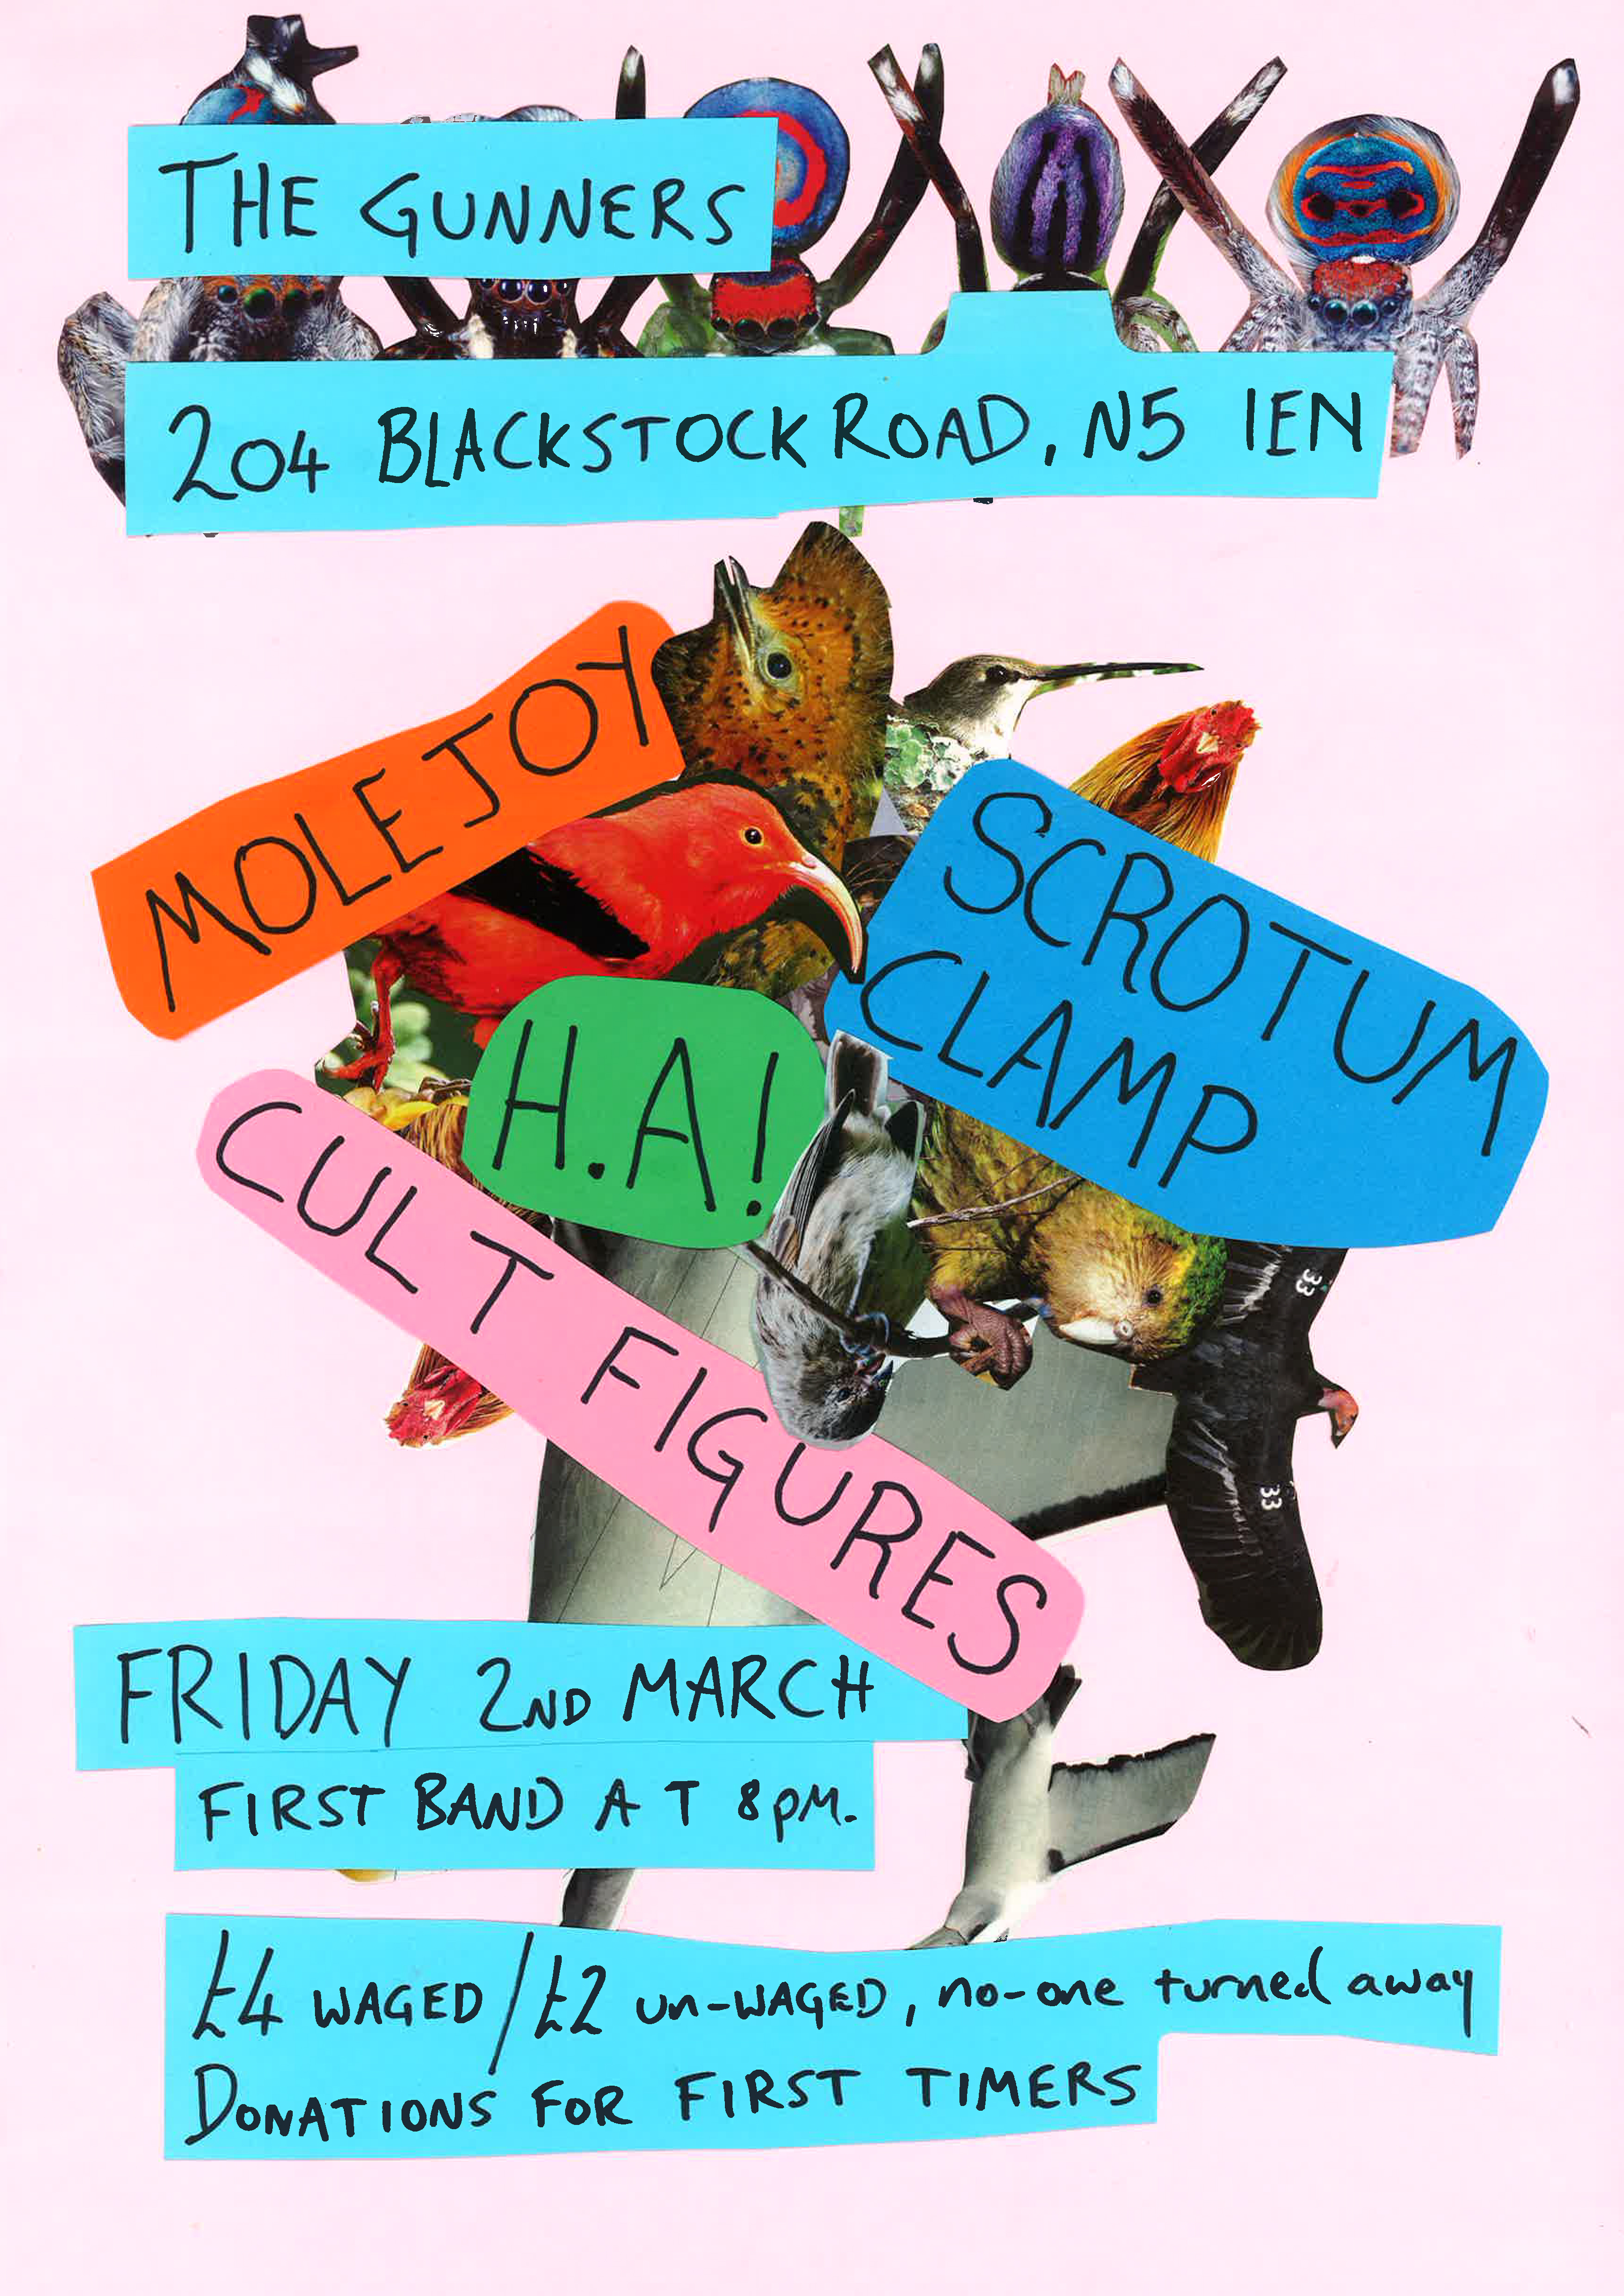 Molejoy, Scrotum Clamp, Cult Figures and H.A! Live at The Gunners.